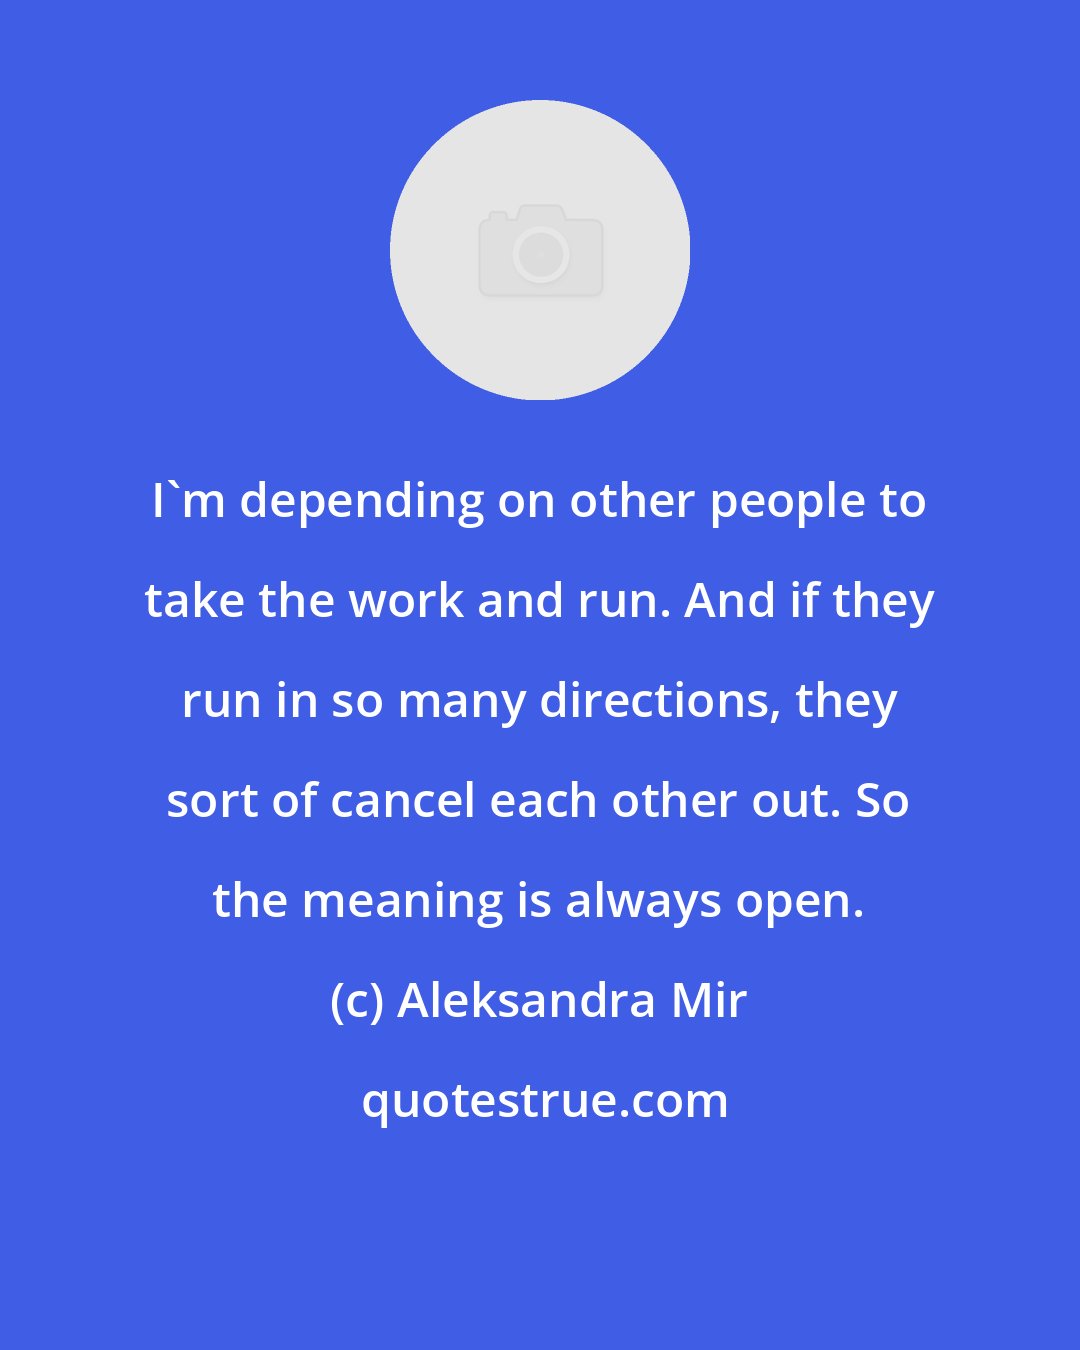 Aleksandra Mir: I'm depending on other people to take the work and run. And if they run in so many directions, they sort of cancel each other out. So the meaning is always open.